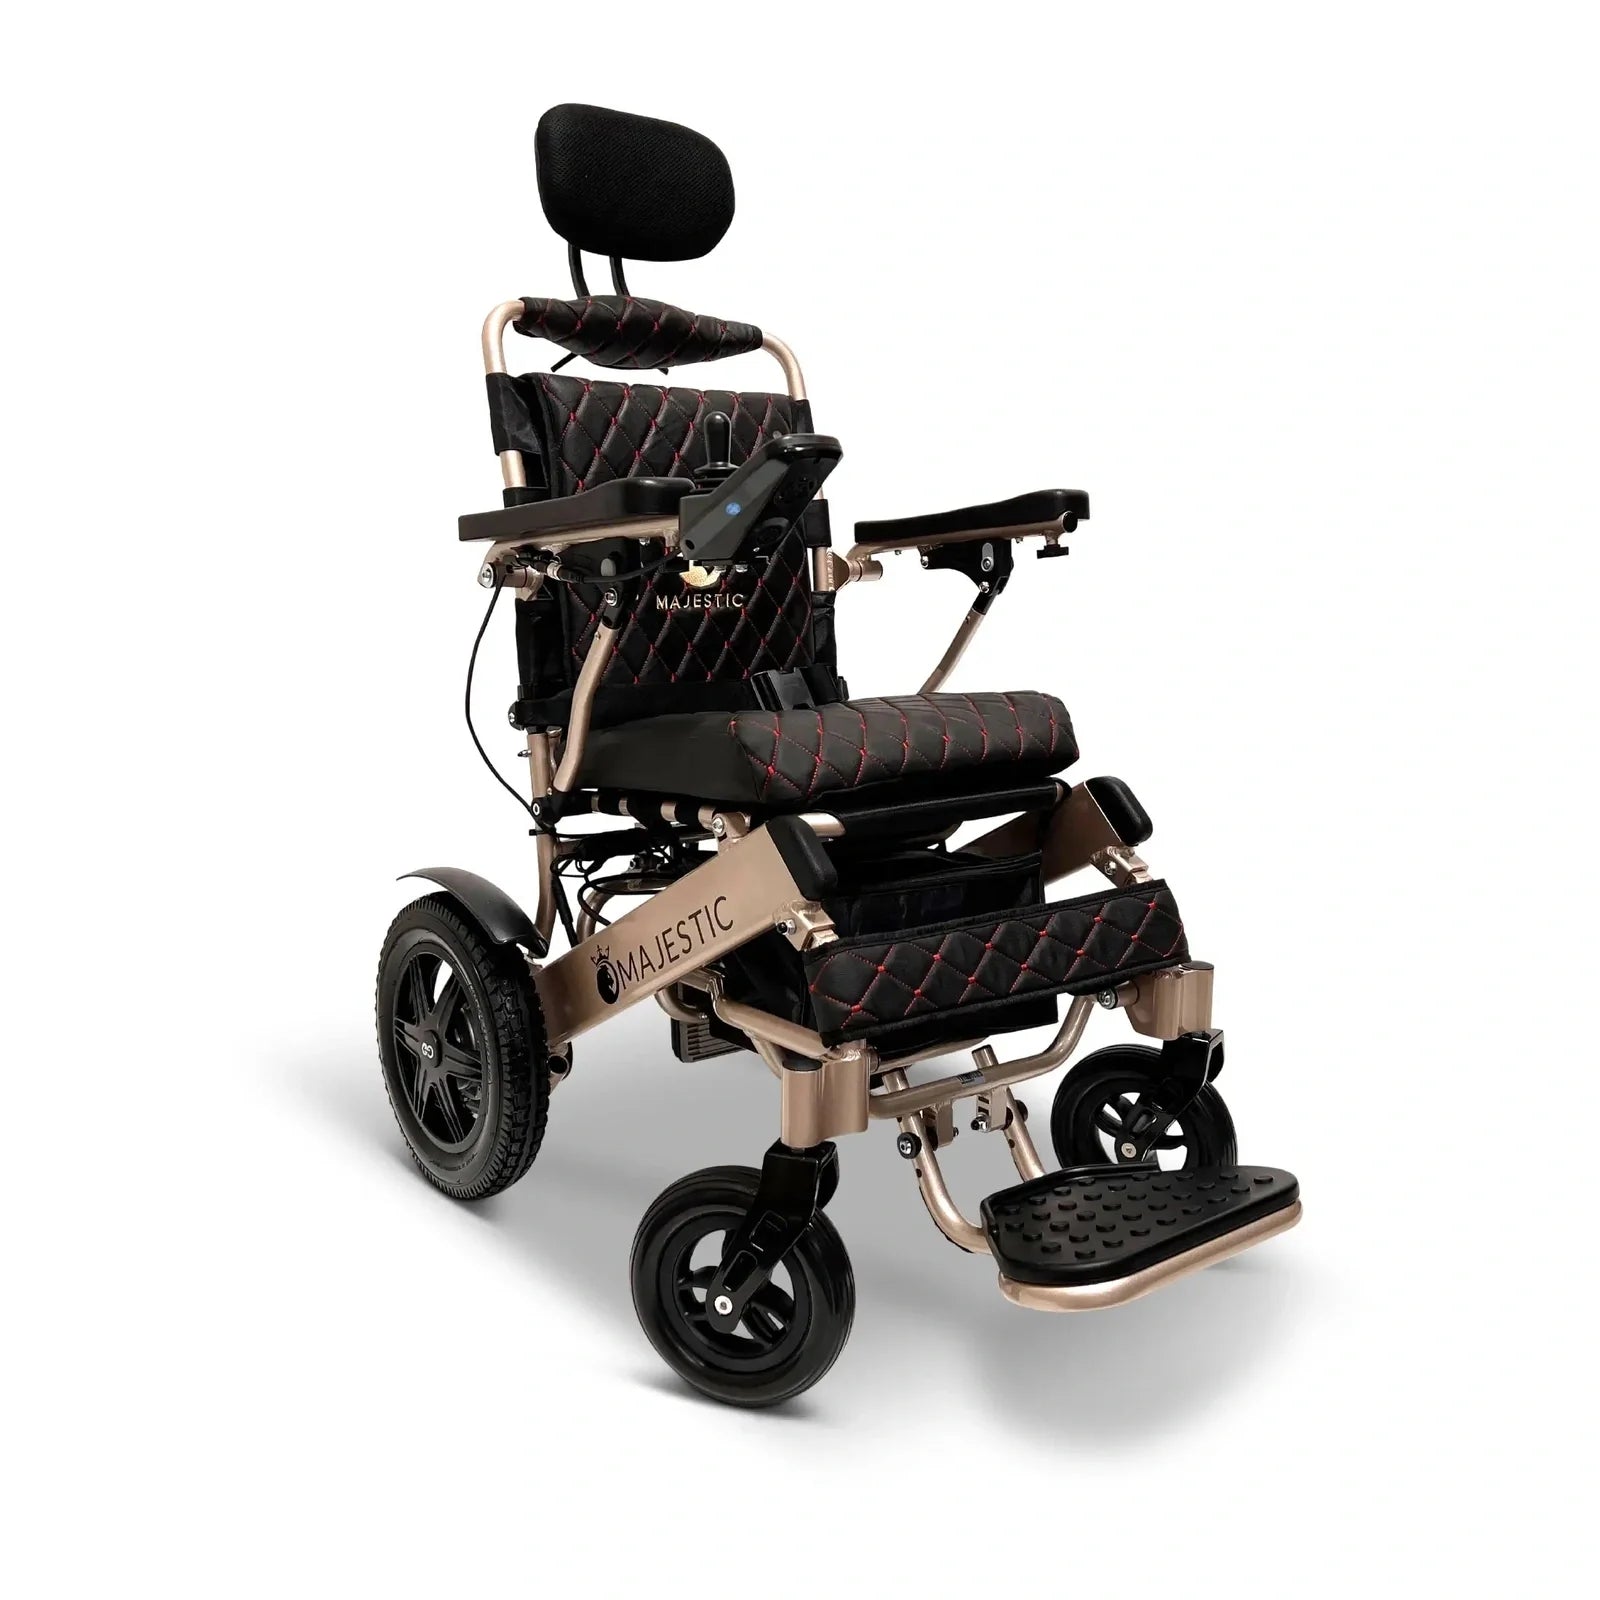 ComfyGO Majestic IQ-9000 Long Range Remote Controlled Folding Reclining Electric Wheelchair Power Wheelchairs ComfyGO Bronze Black Auto Reclining